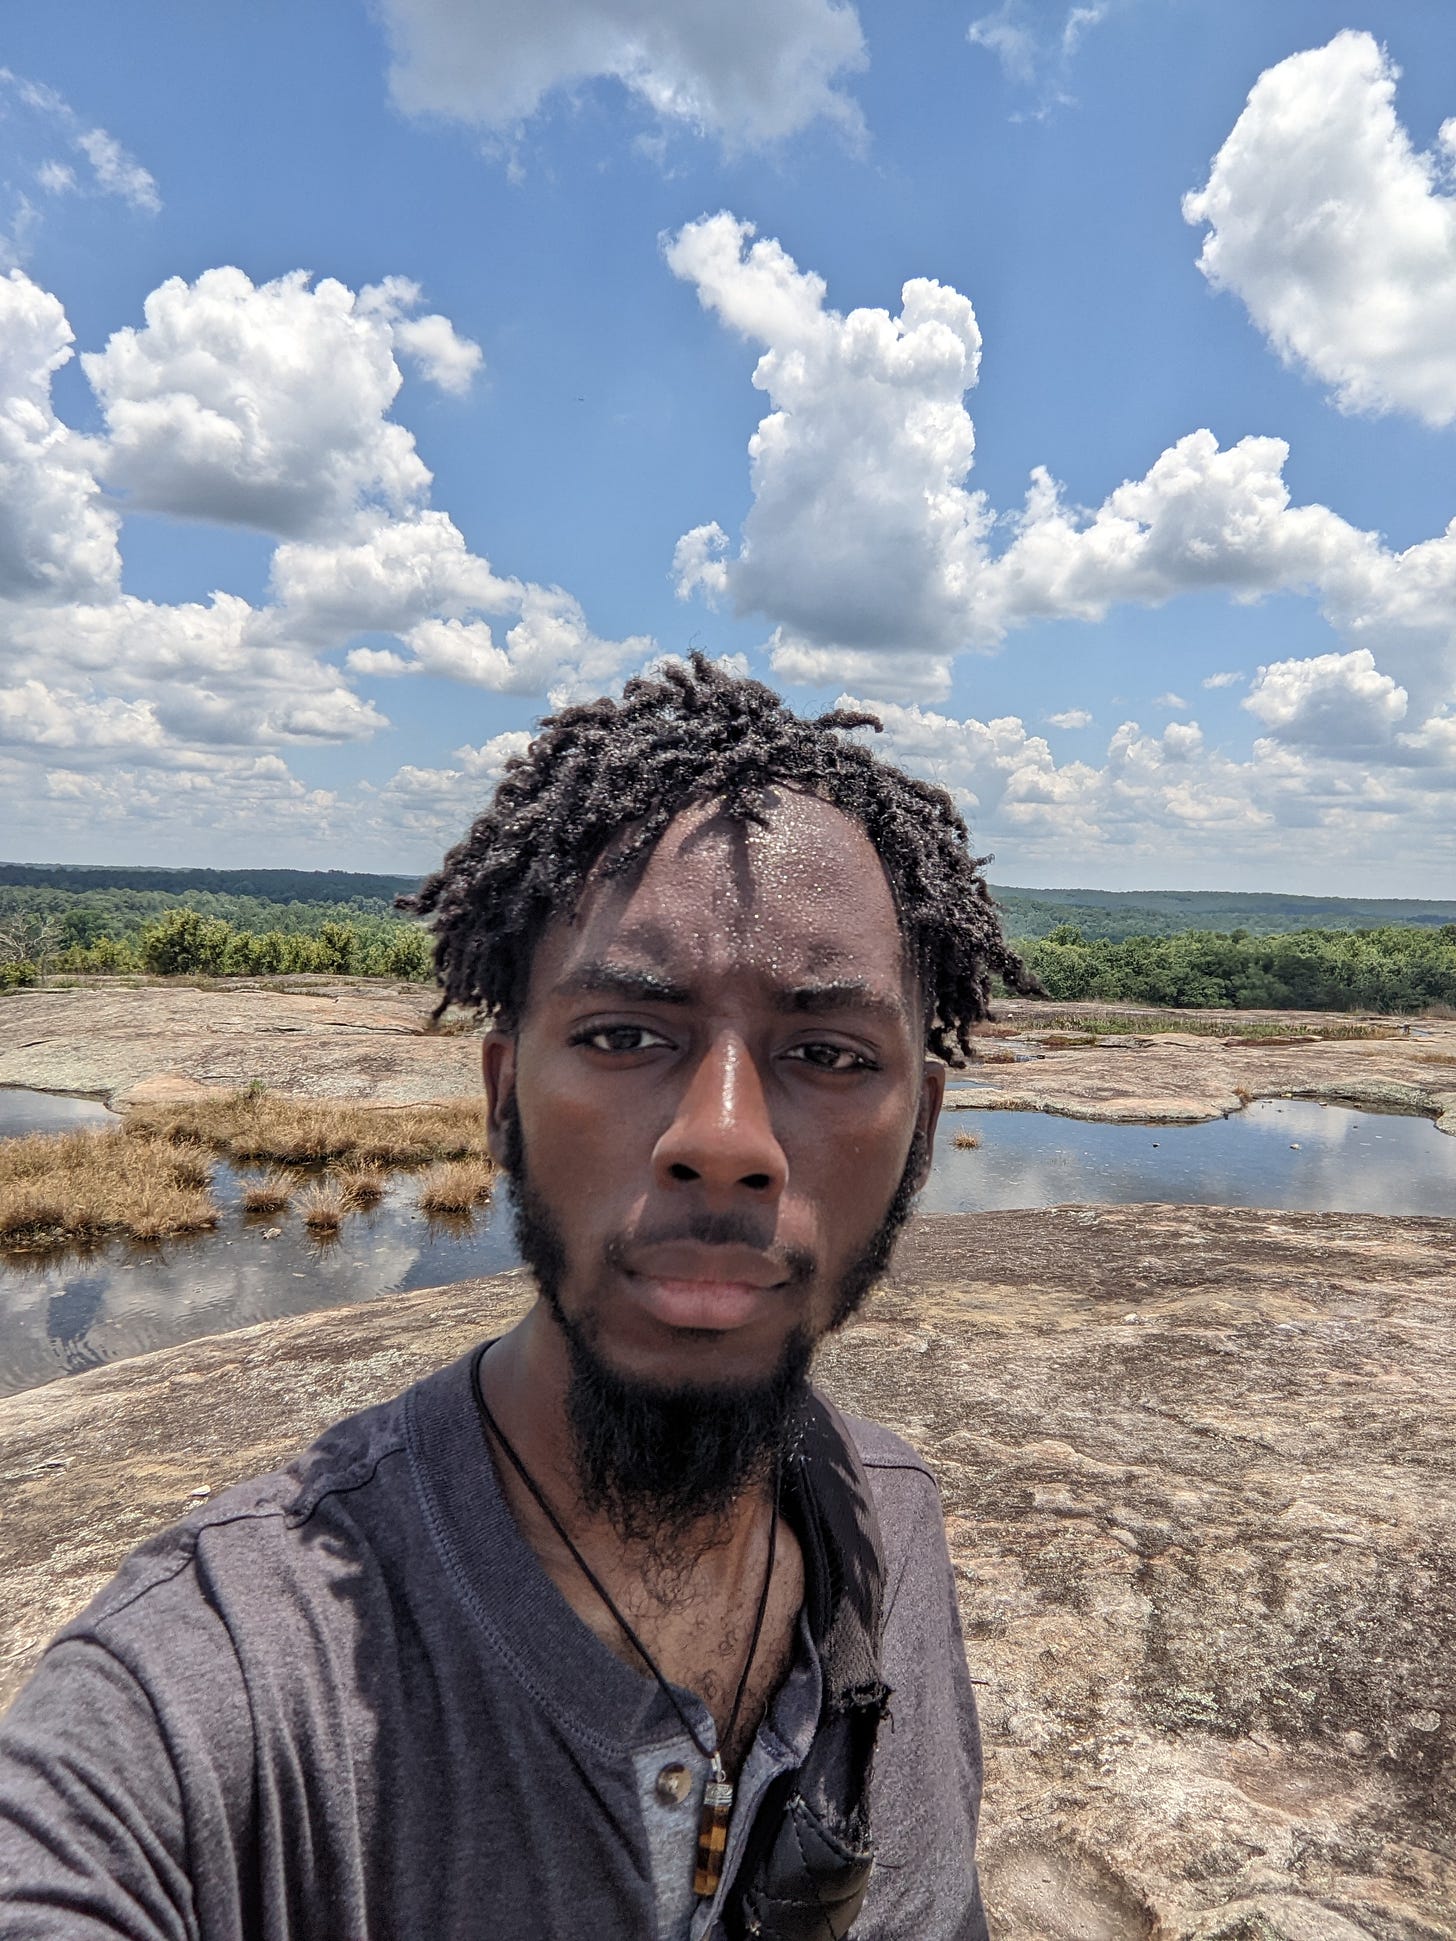 My brown face, sprinkled with sweat, crinkled baby locs atop my head. I'm standing on a so-called mountain with clouds and trees in the distance. There are shallow pools of water behind me on the mountain.